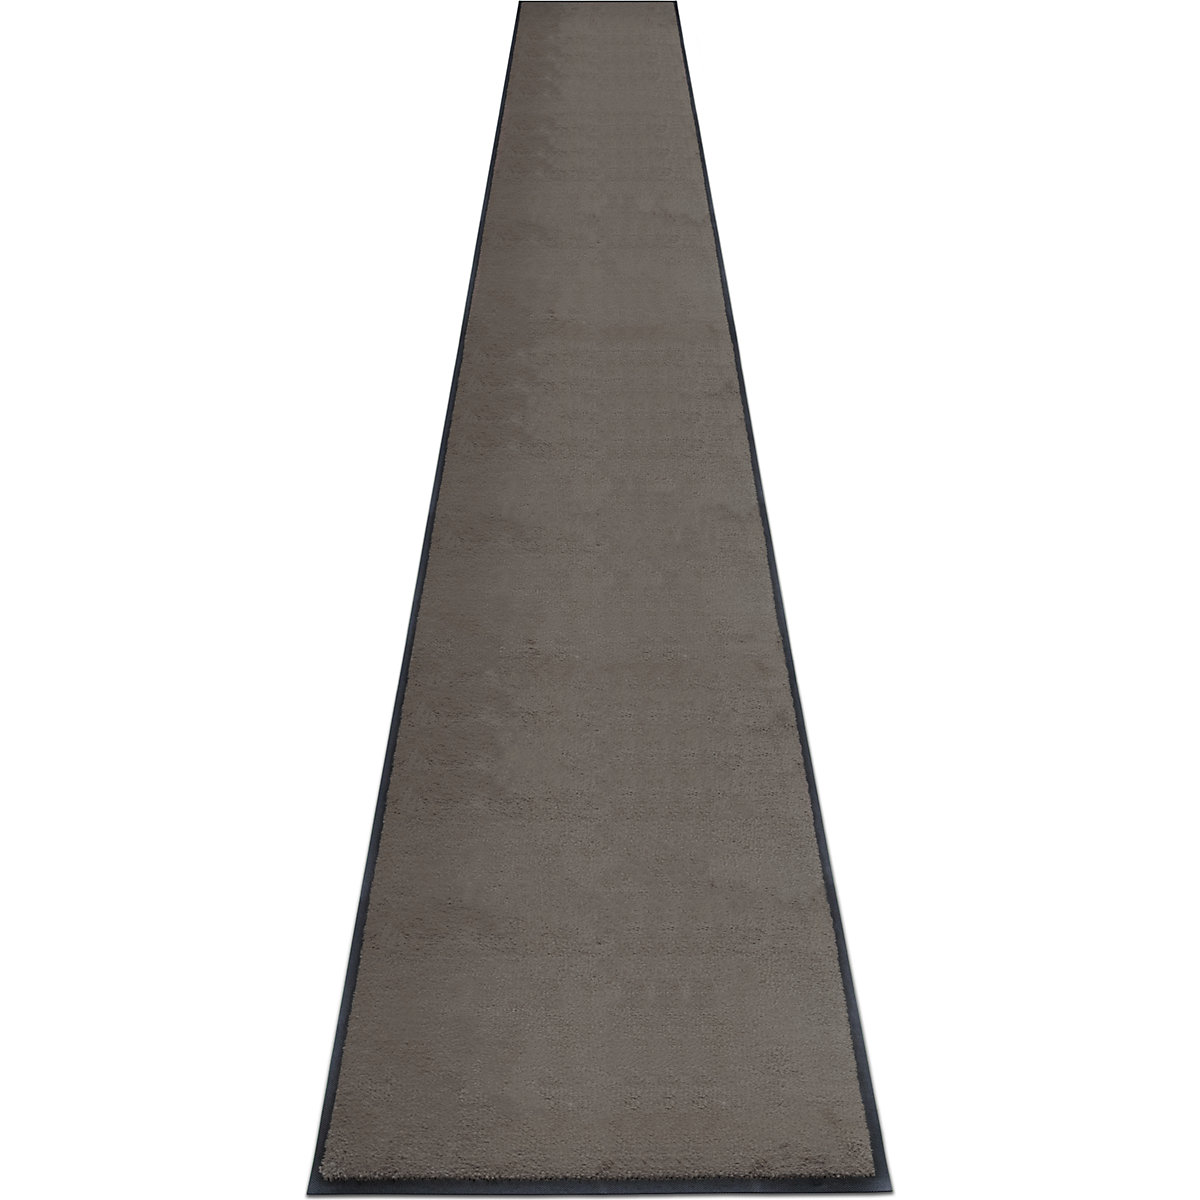 EAZYCARE STYLE entrance matting, LxW 3000 x 850 mm, grey brown-4